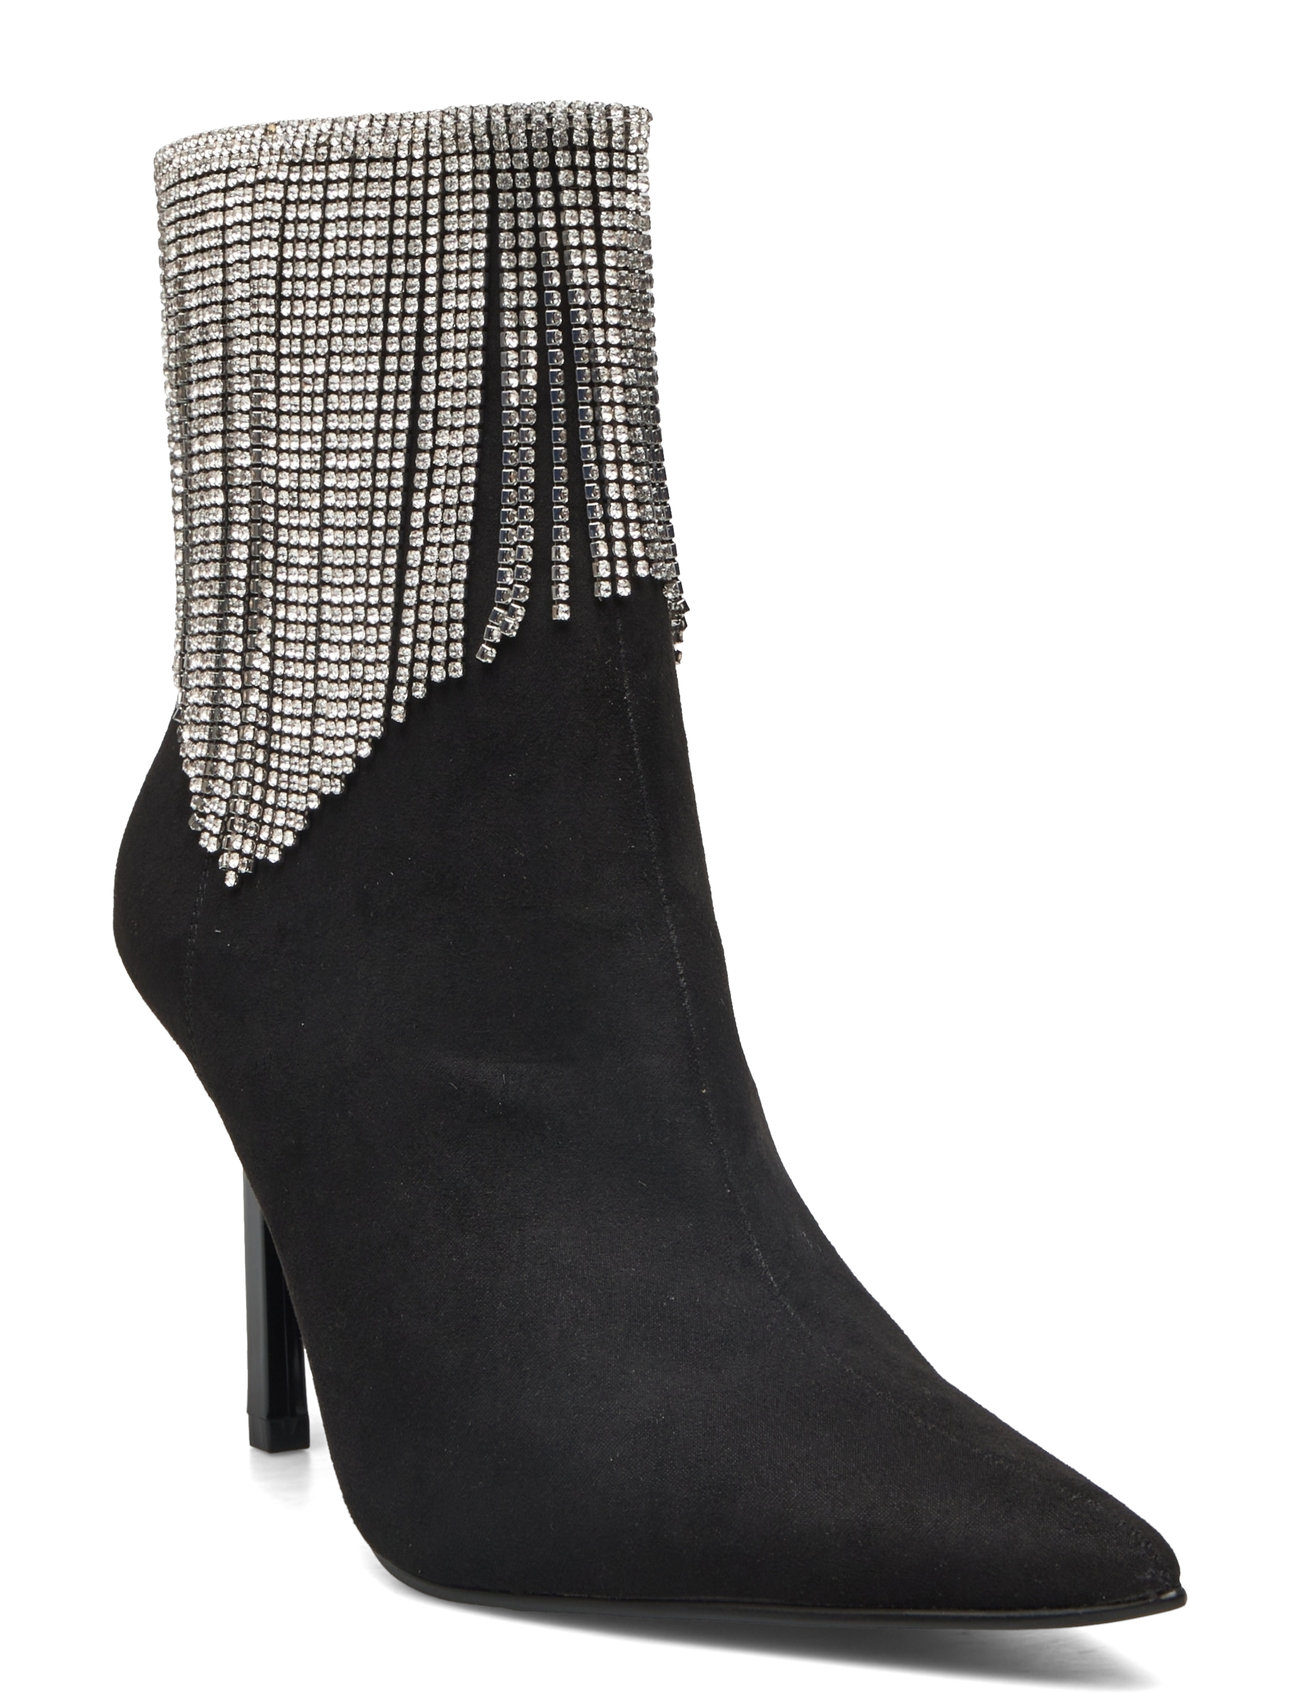 Influx Bootie Shoes Boots Ankle Boots Ankle Boots With Heel Black Steve Madden